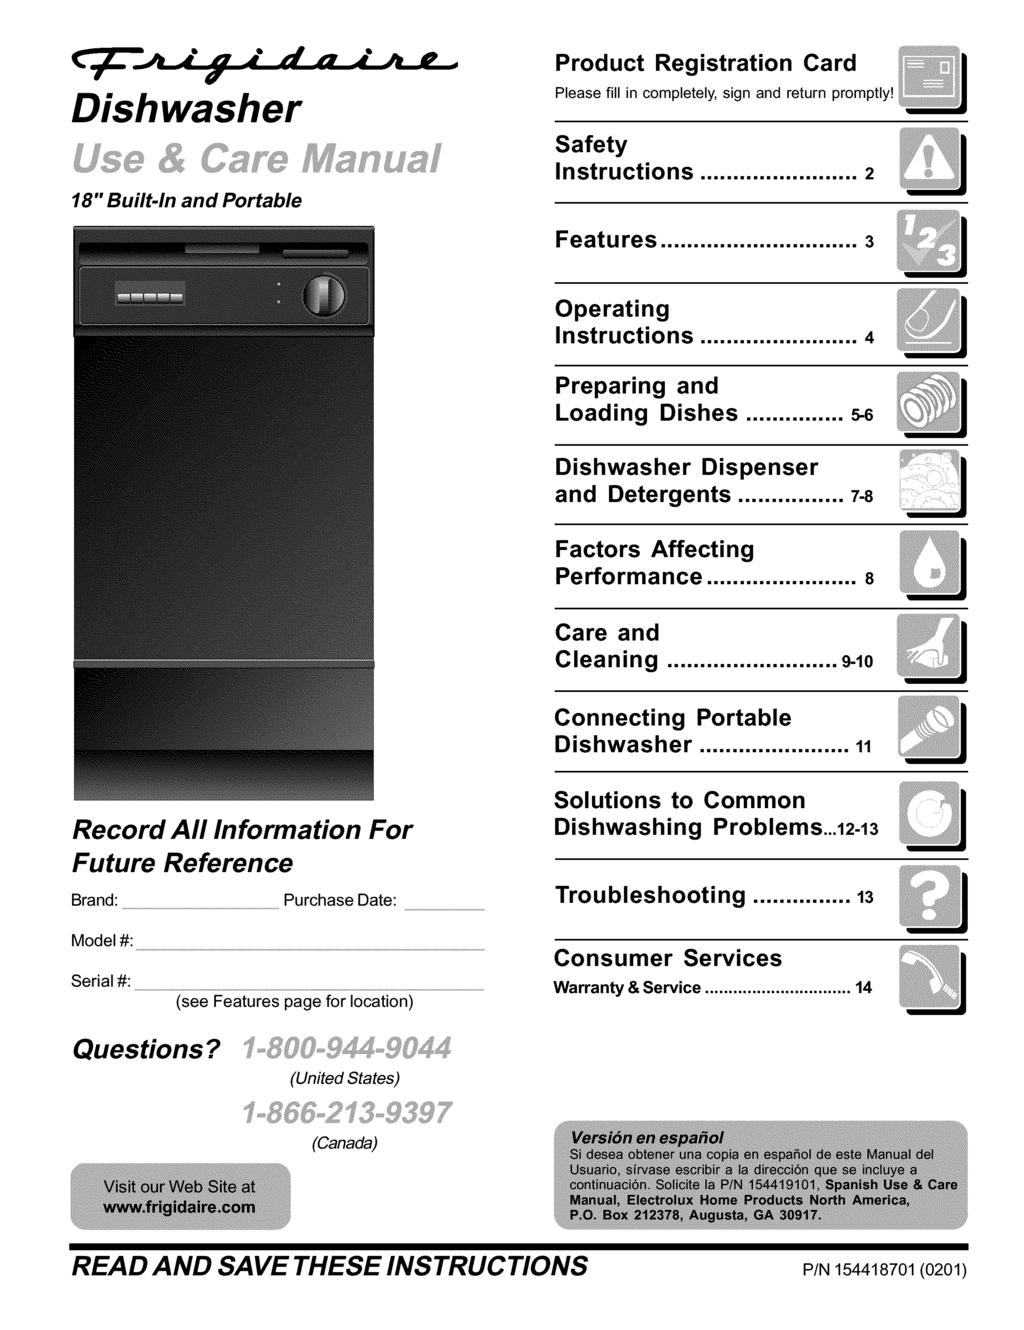 g Dishwasher 18" Built-In and Portable Product Registration Card Please fill in completely, sign and return promptly! Safety Instructions... 2 Features... 3 Operating Instructions.